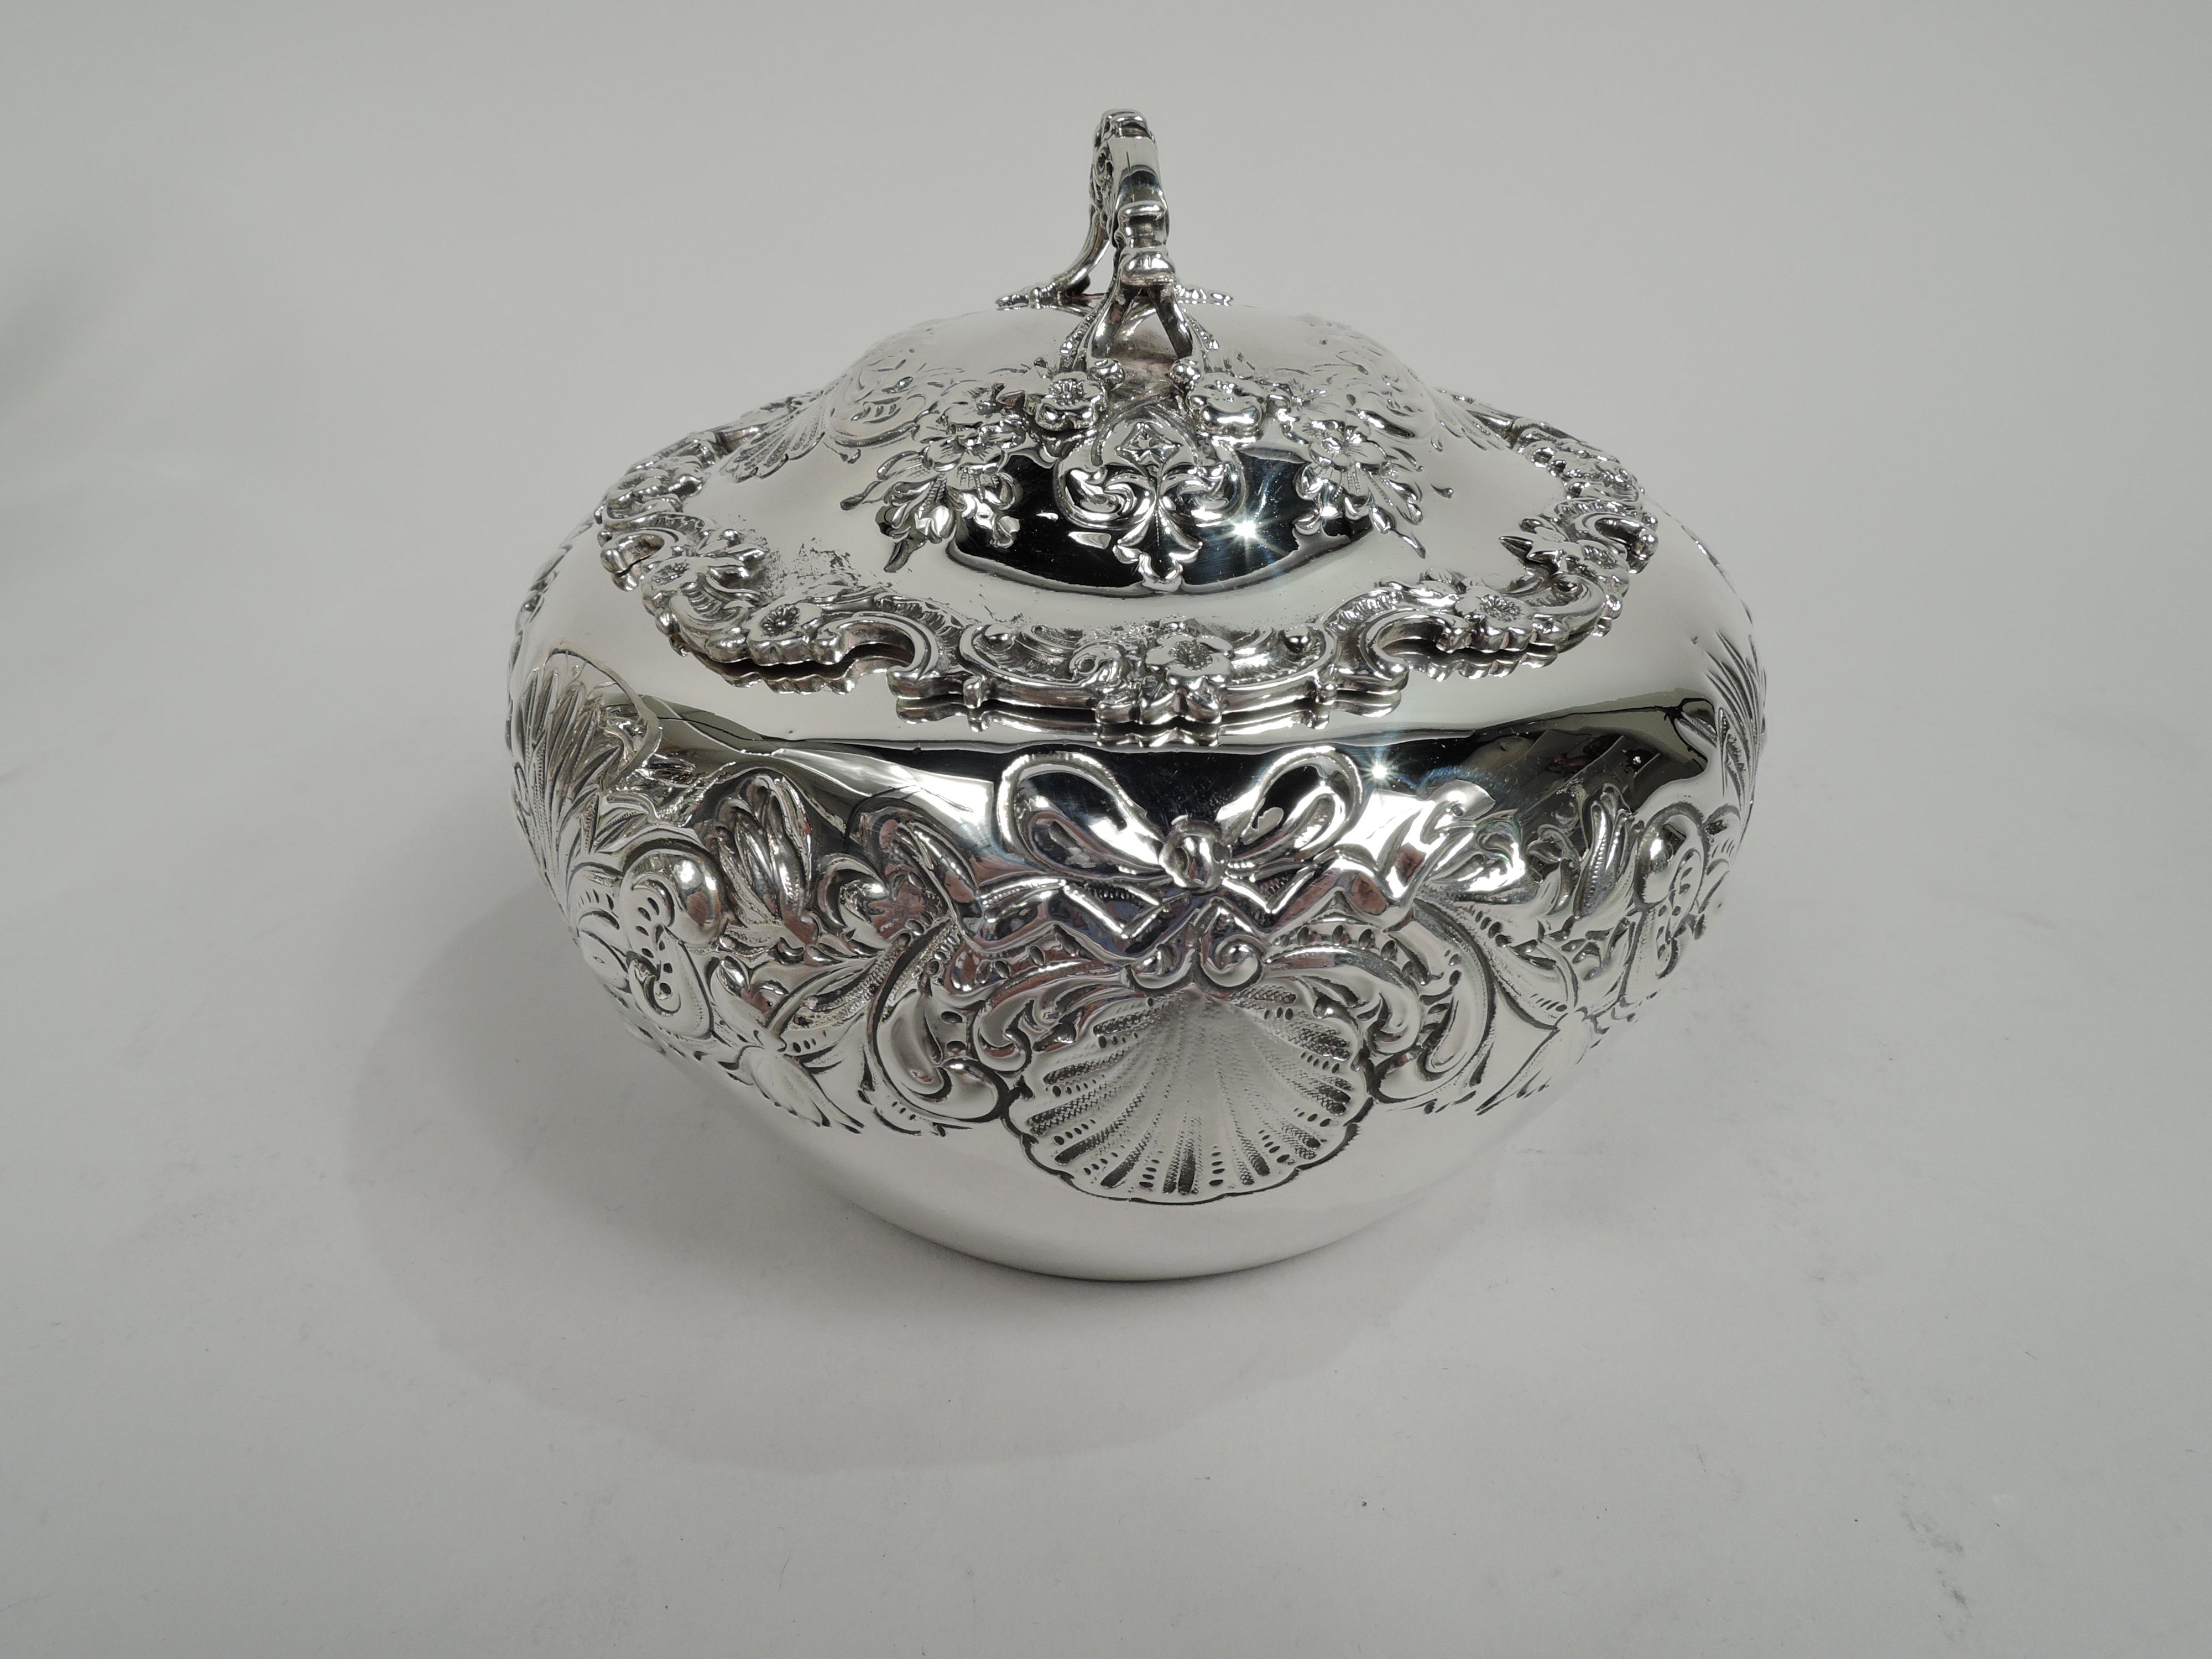 Turn-of-the-century Edwardian Classical sterling silver trinket box. Made by William B. Durgin Co. (later part of Gorham) in Concord. Round with curved and tapering sides. Cover domed with applied flower and scroll rim; scroll bracket handle same.